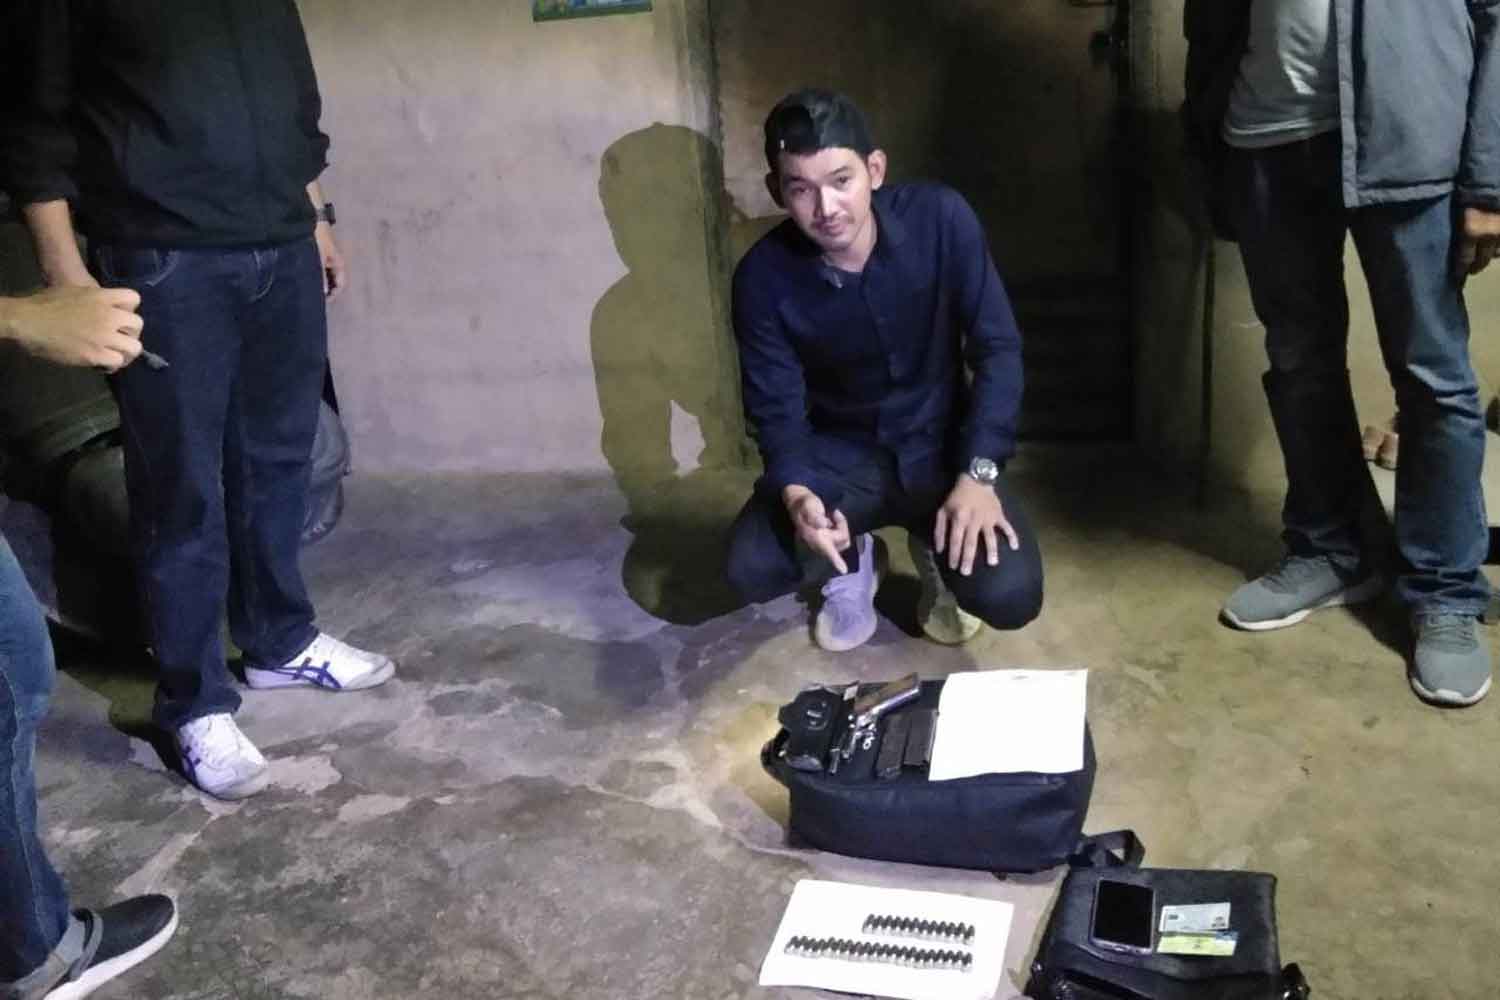 
Danusorn Noomcharoen points to weapons and ammunition early Wednesday morning inside his Phetchaburi province home, where he was arrested on suspicion of killing his ex-wife inside a Bangkok shopping mall. 
